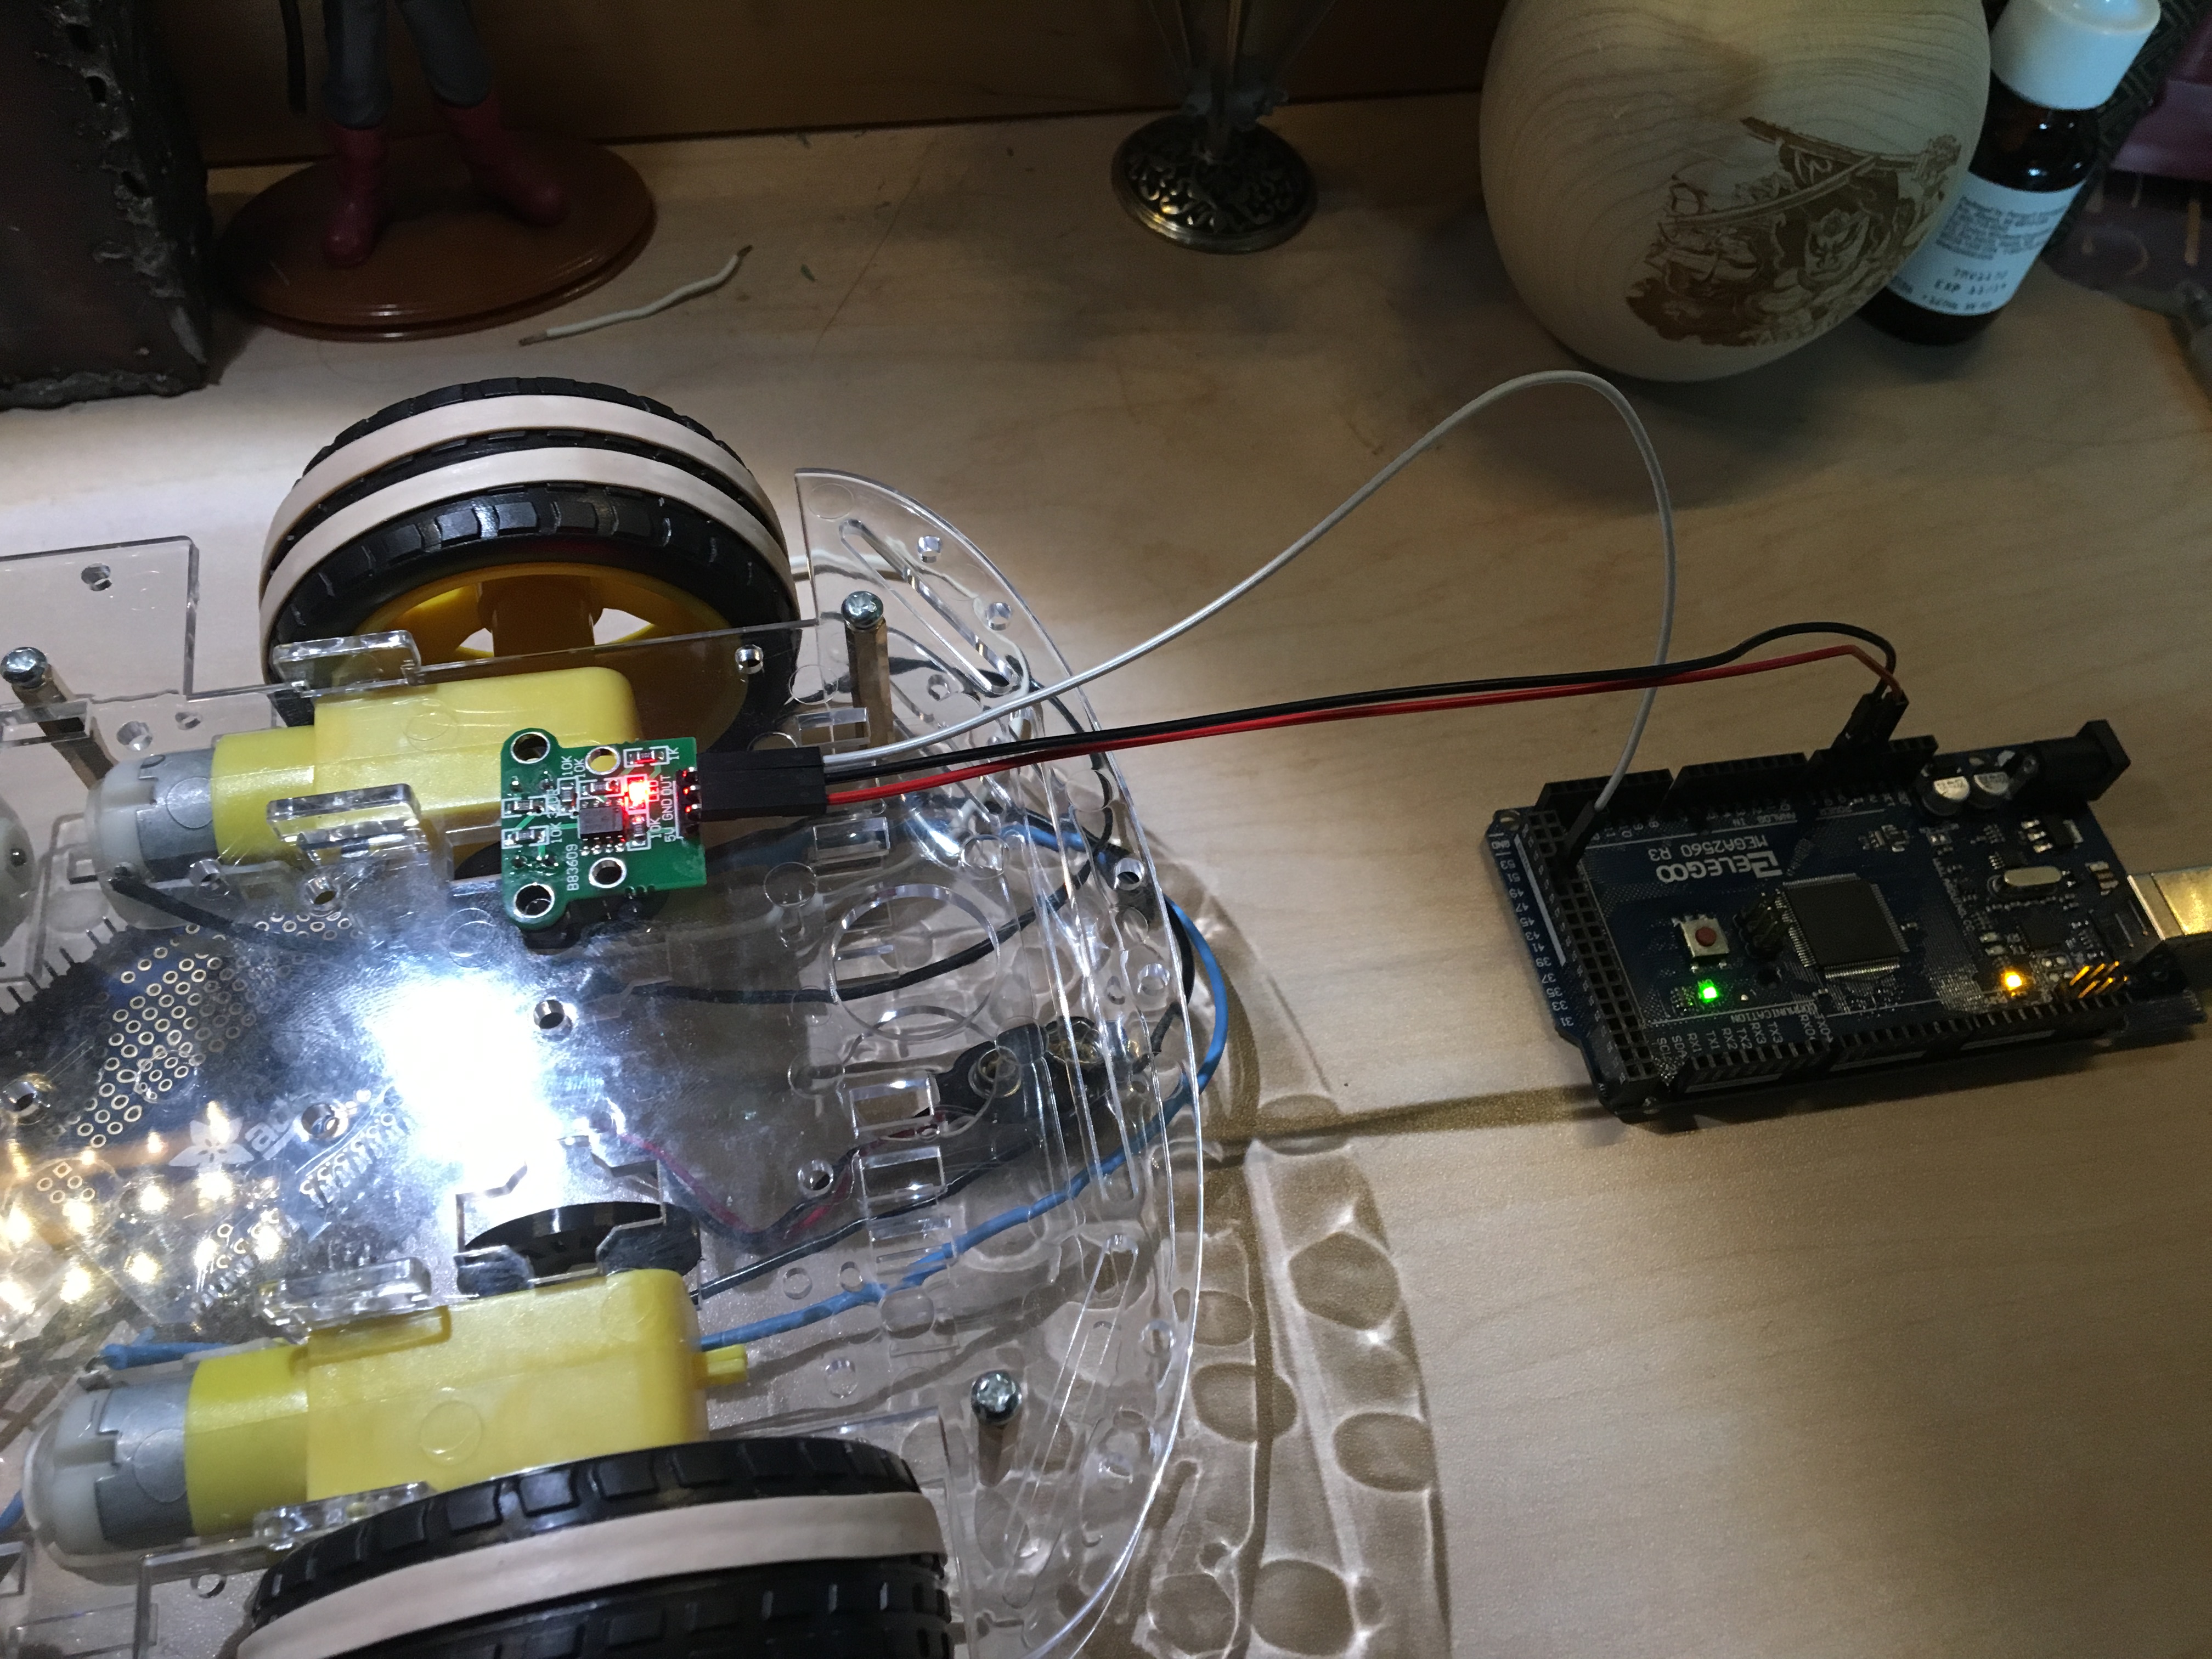 The wheel encoder connected to the Arduino